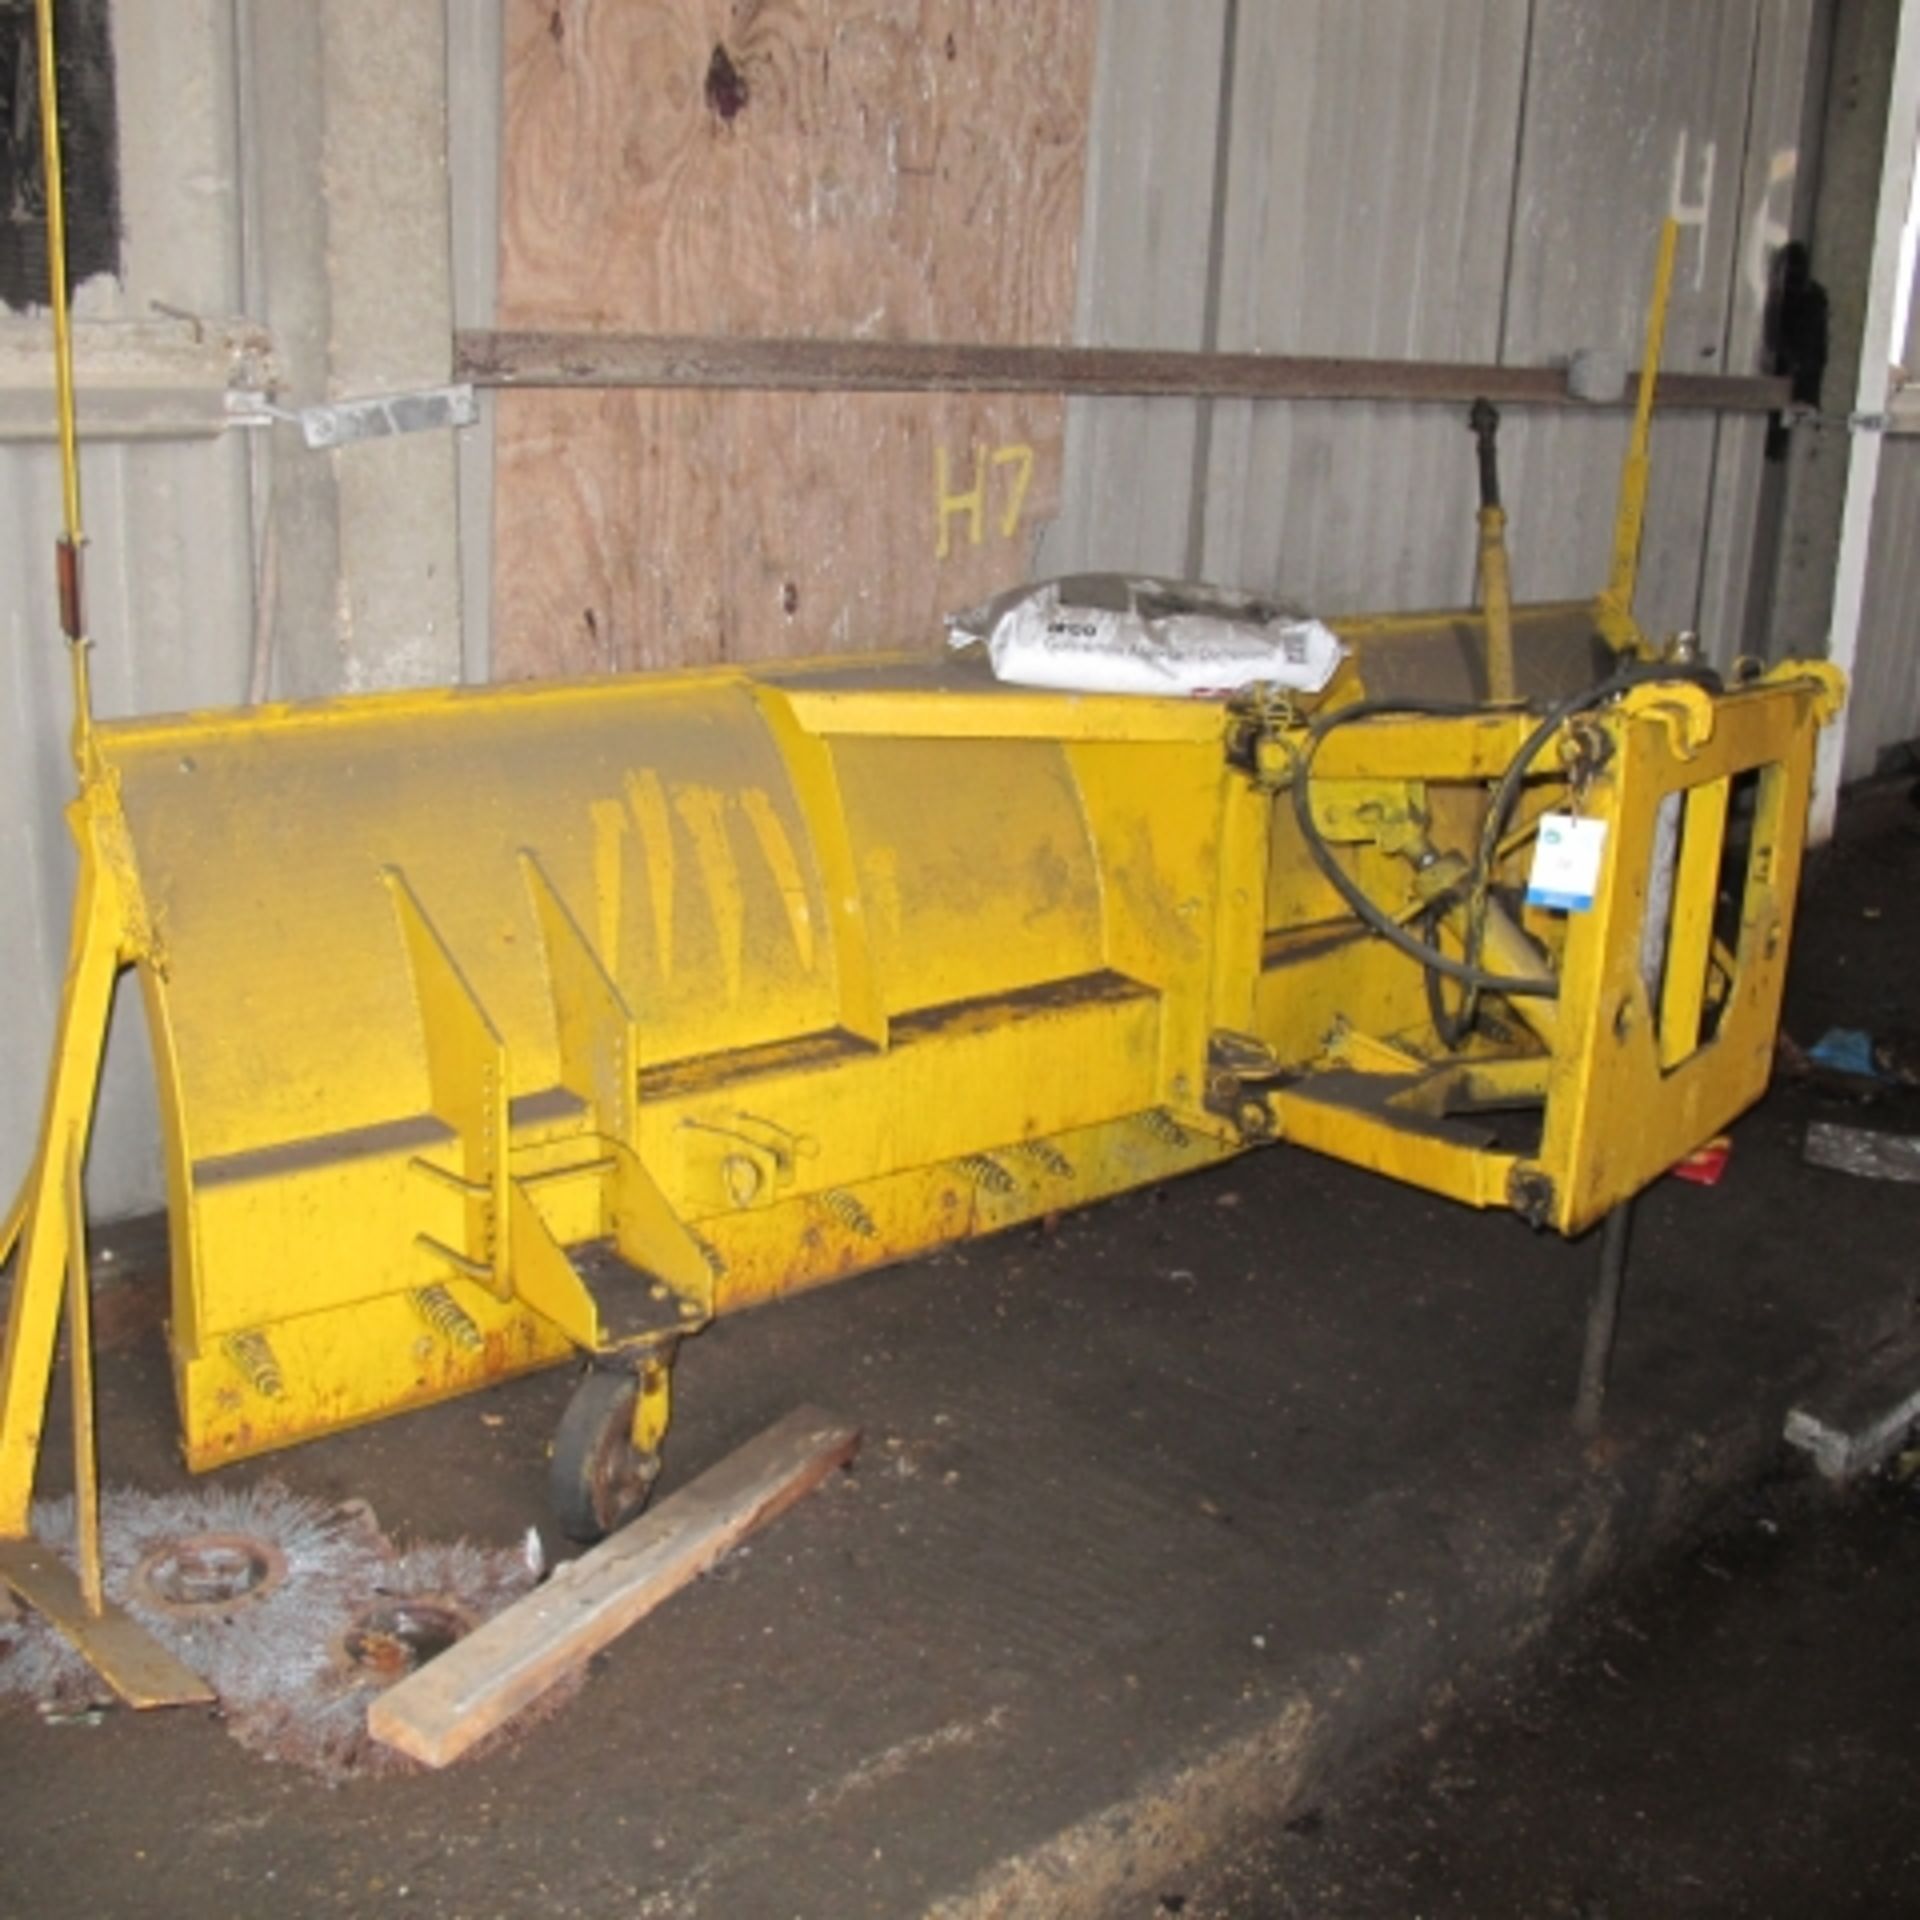 * Hydraulically Adjustable Snow Plough Attachment 3.07m wide, 0.9m high